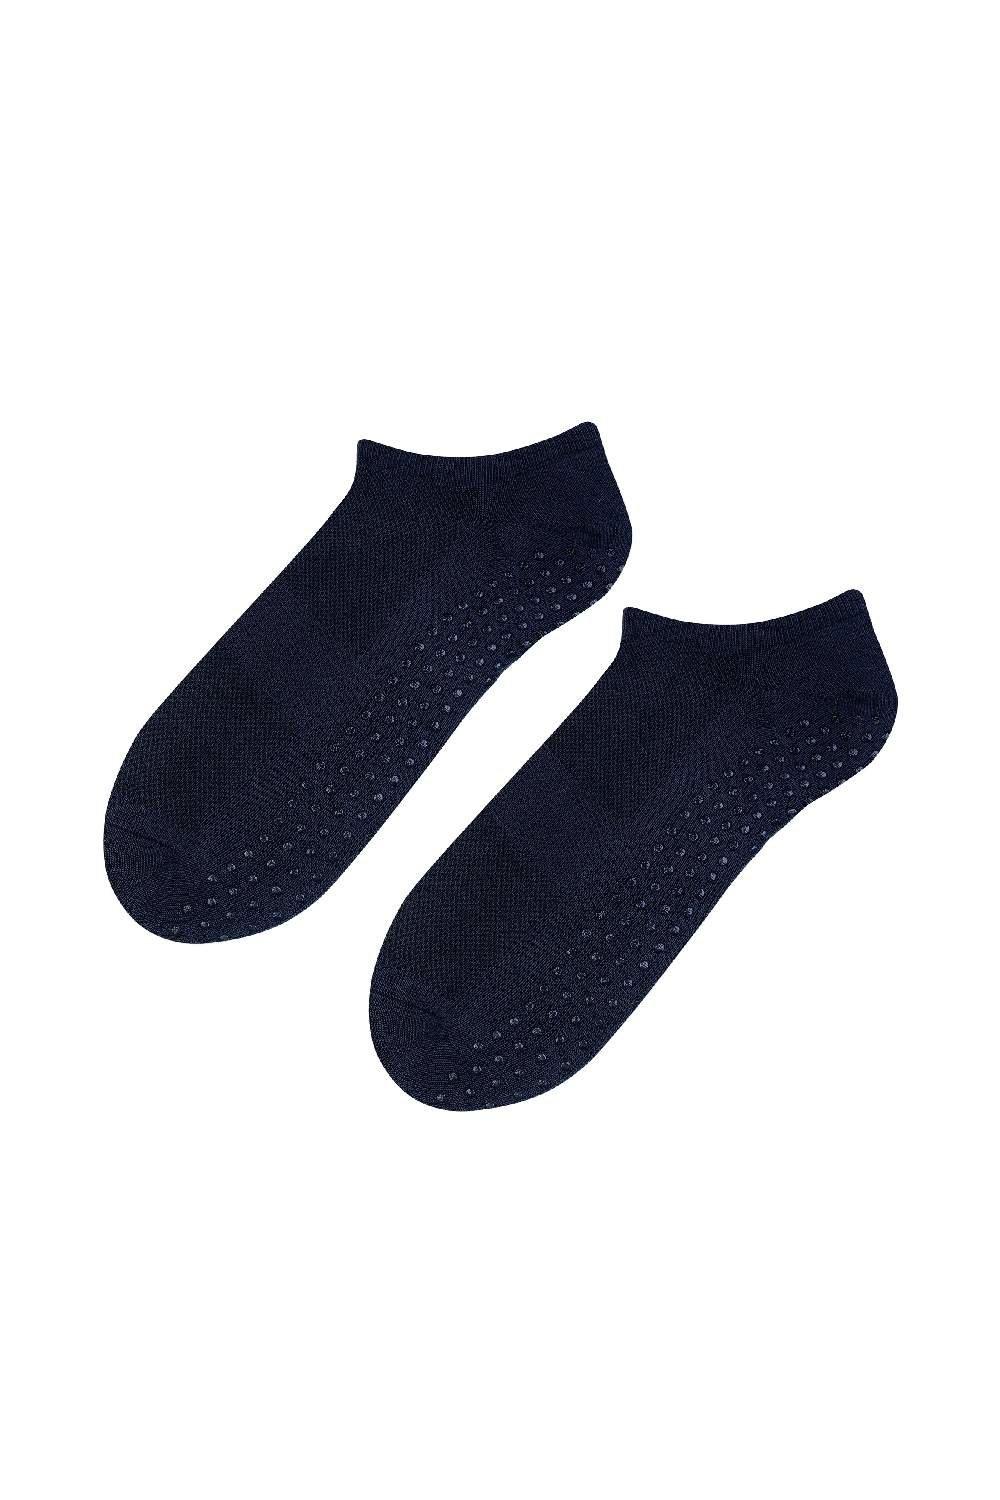 Non Slip Cotton No Show Low Cut Socks with Grips for Yoga & Pilates